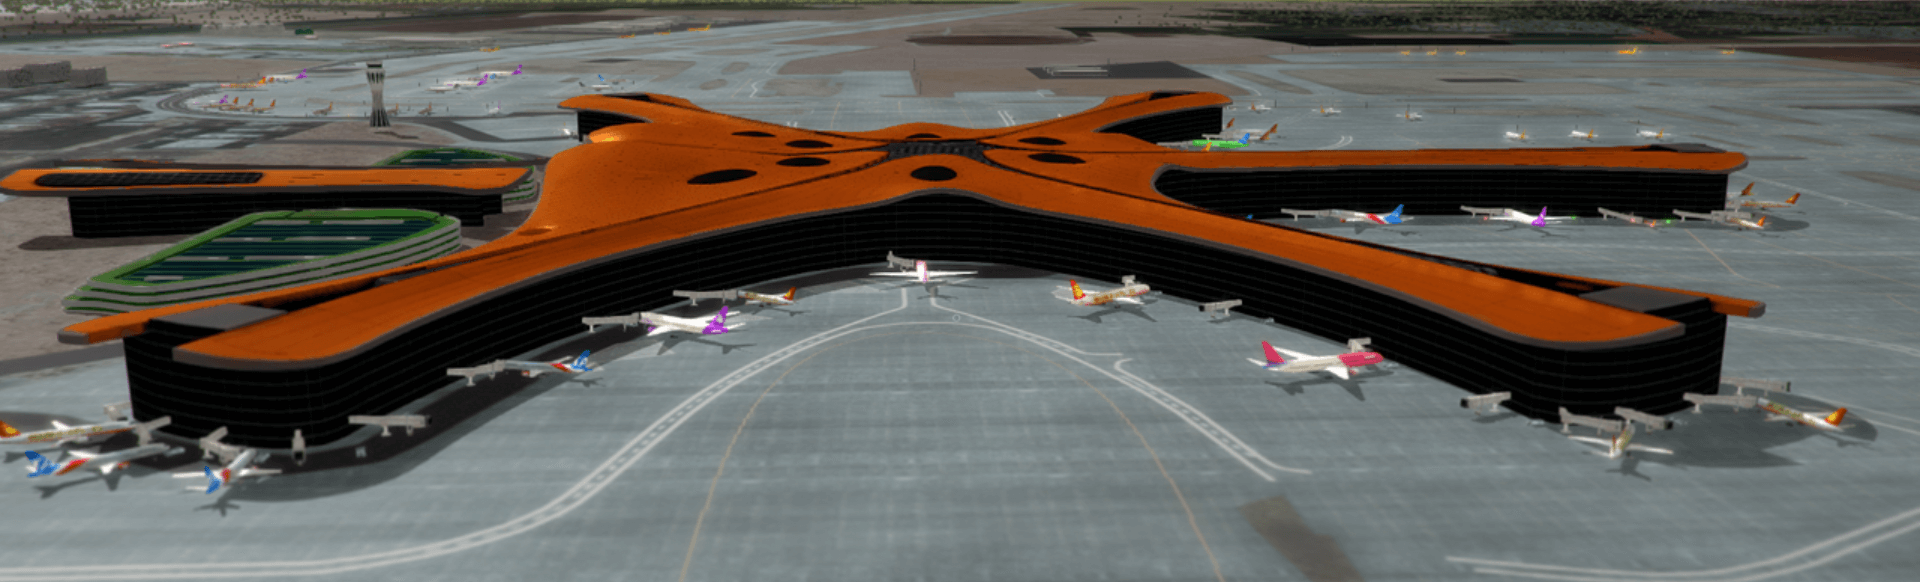 ZBAD airport for Tower3D